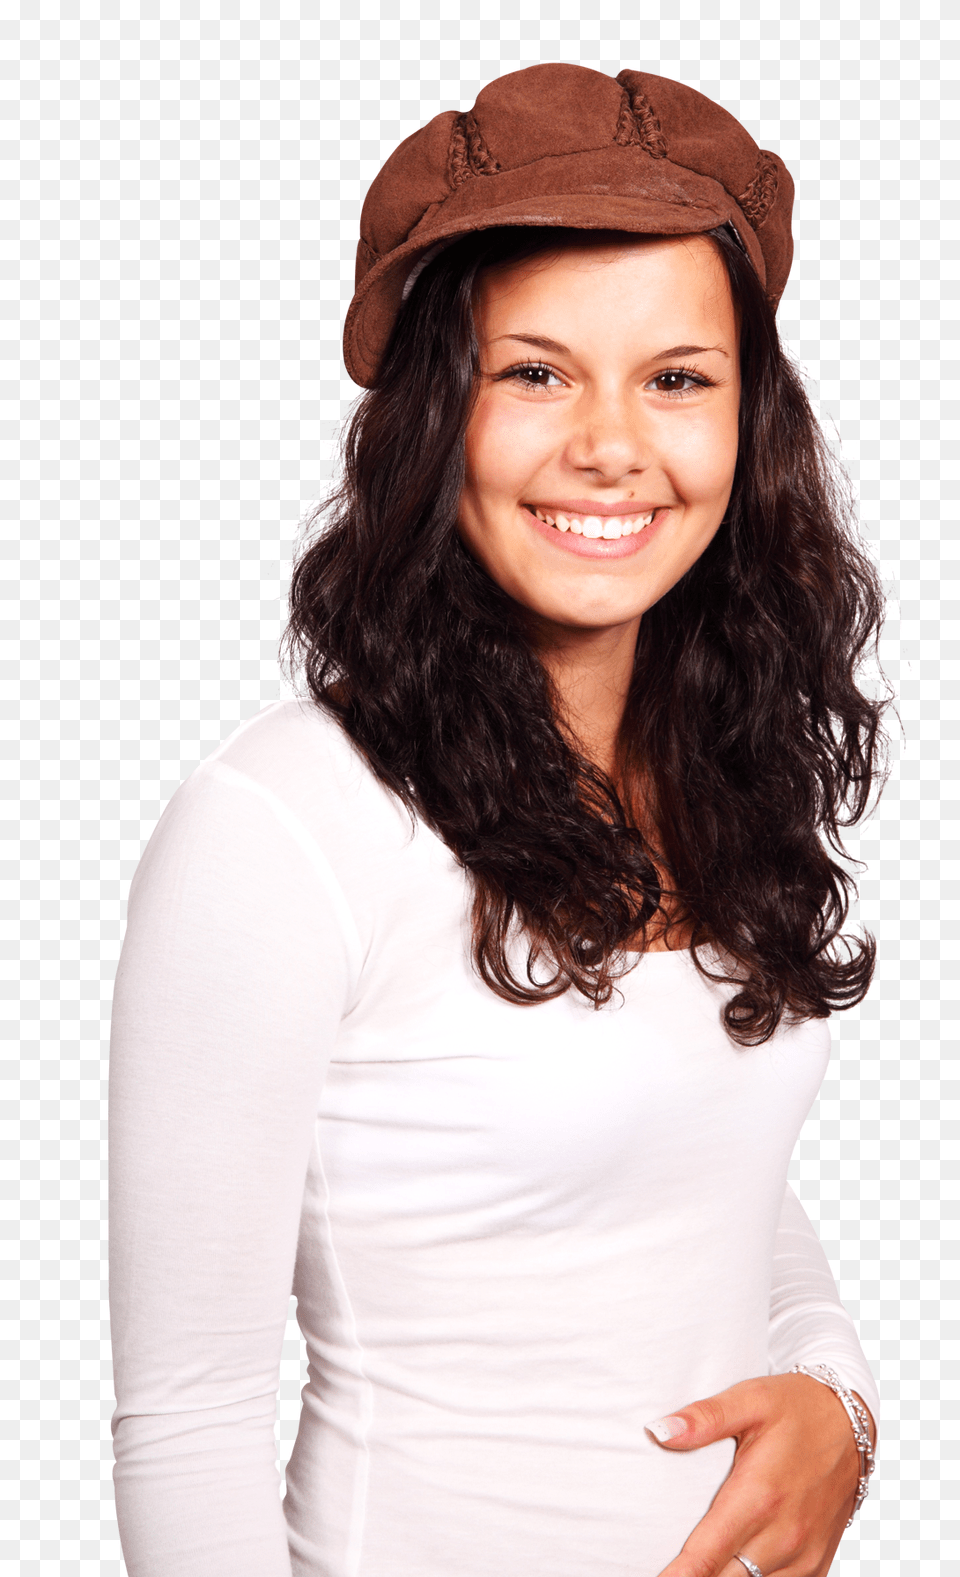 Pngpix Com Girl With Hat On Her Head Image, Adult, Smile, Sleeve, Person Free Transparent Png